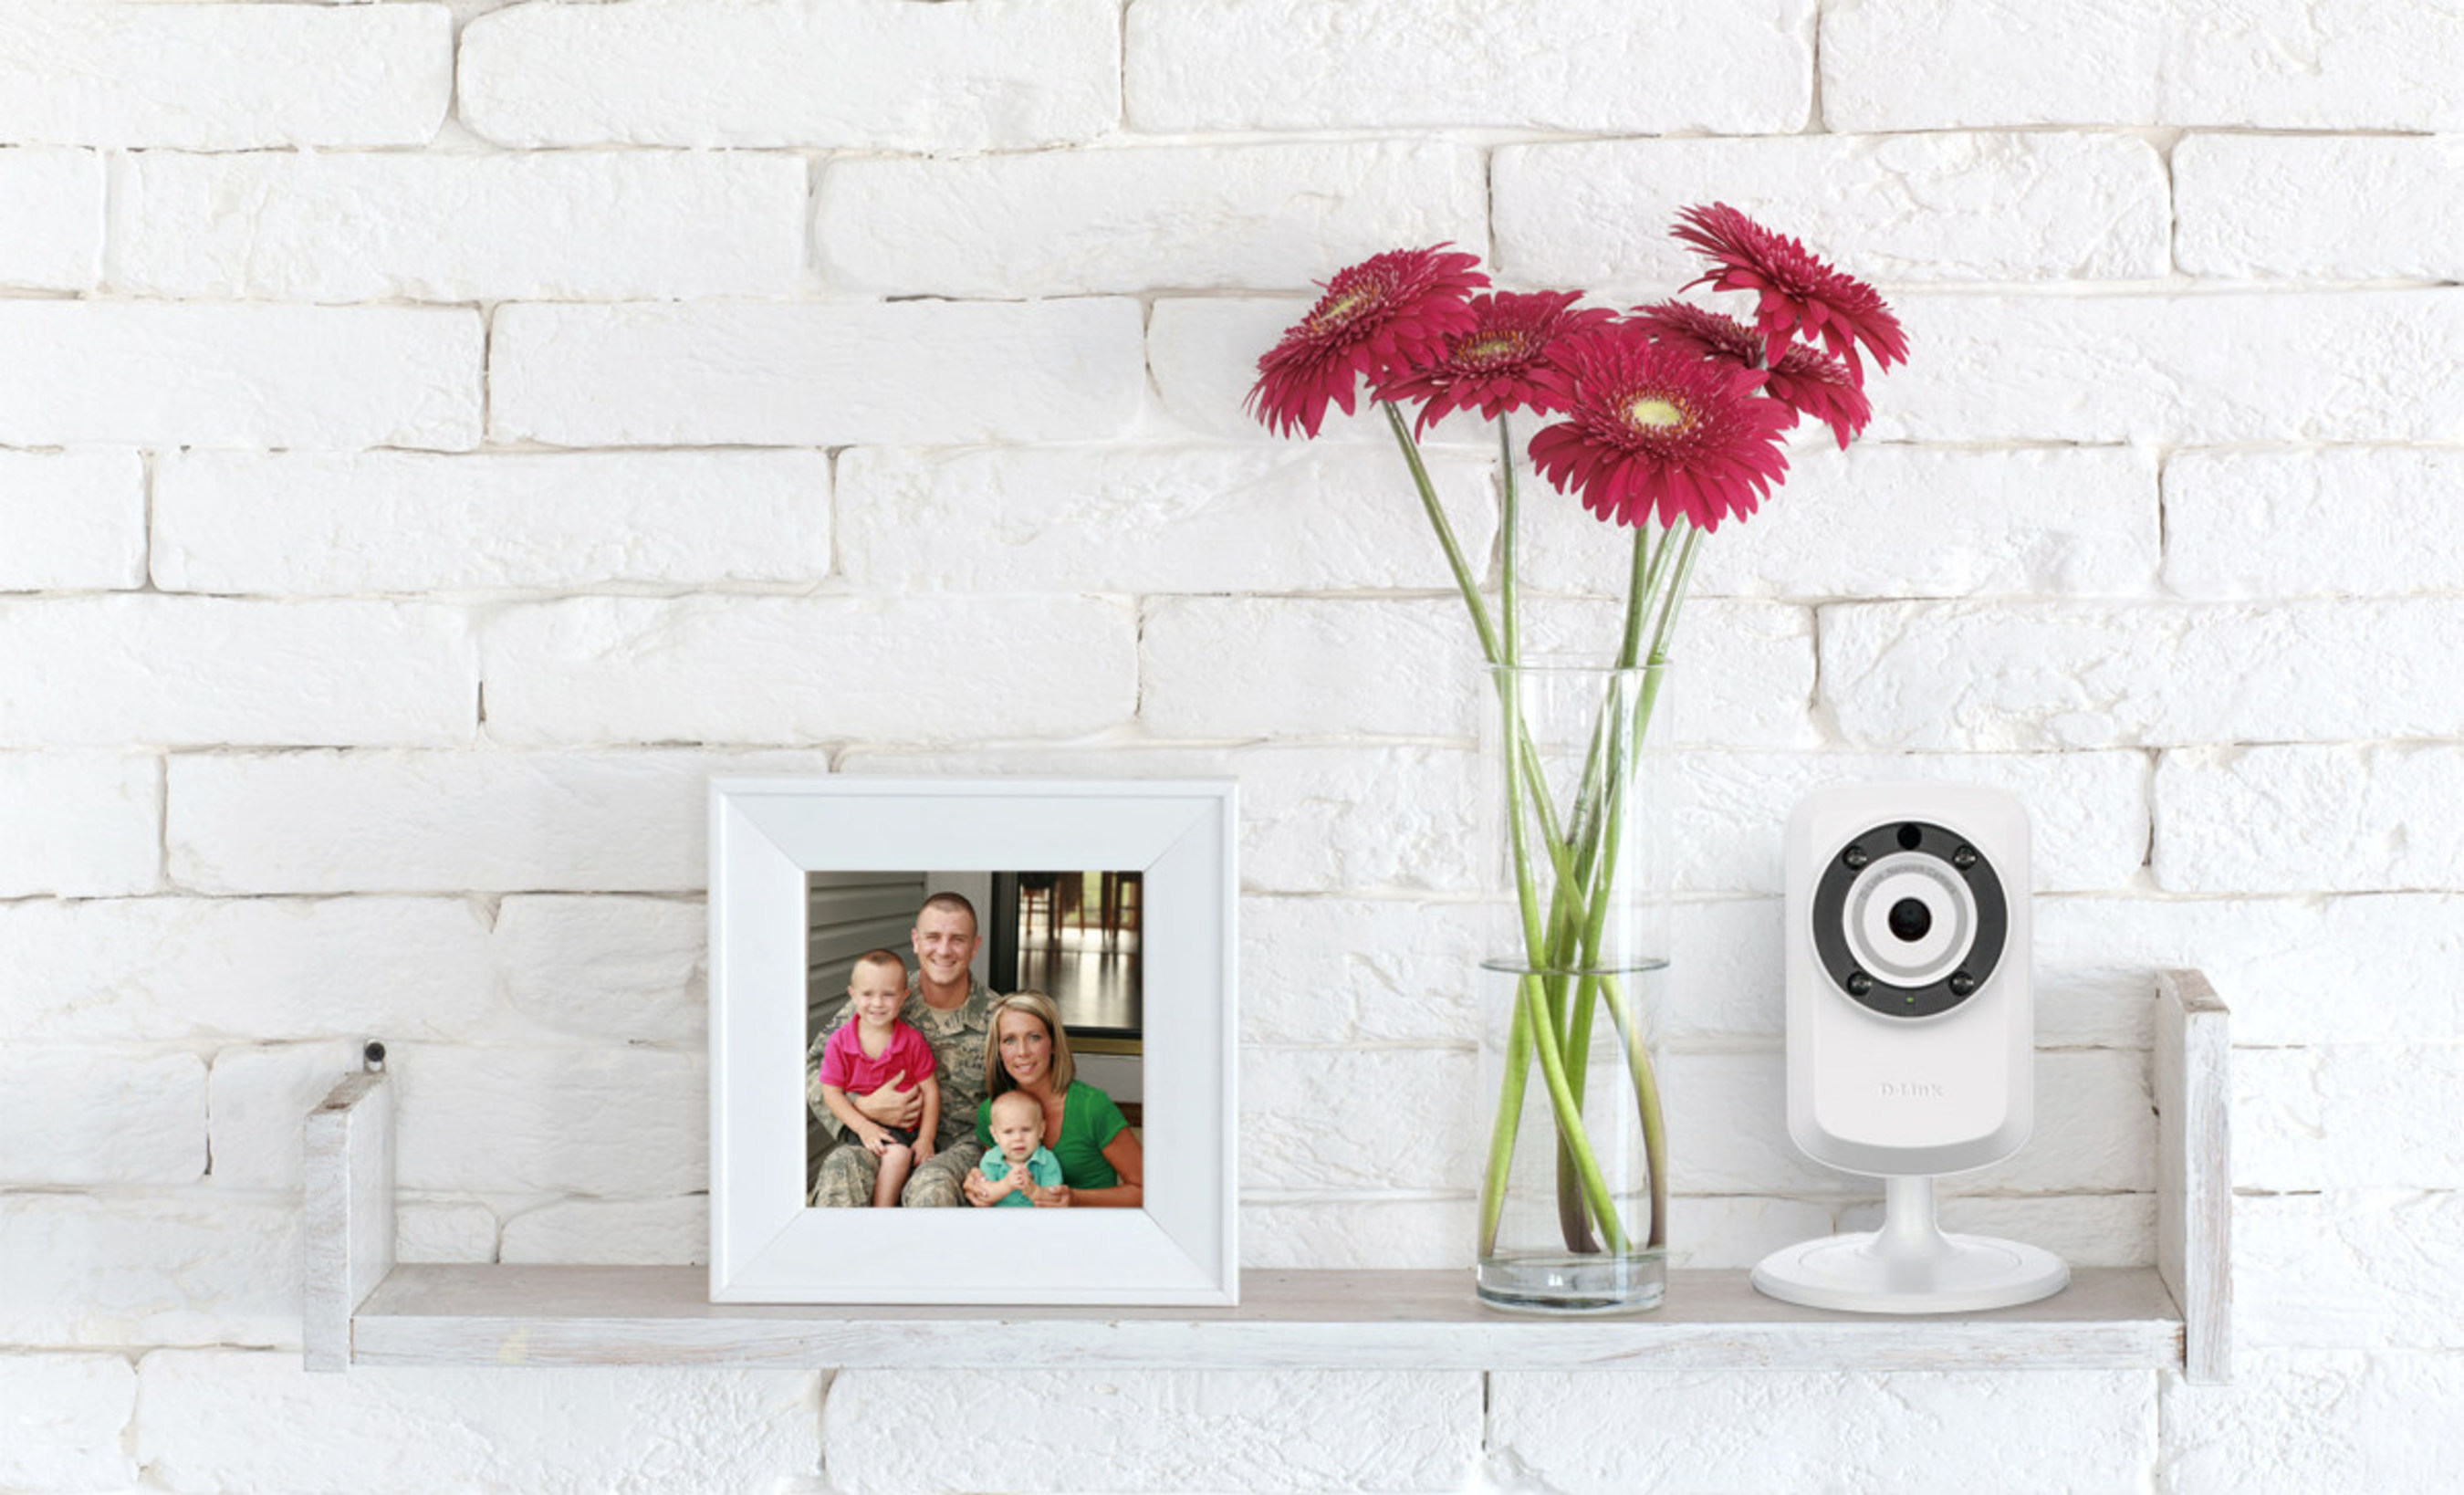 In honor of Military Family Appreciation Month, D-Link offers free Wi-Fi Cameras and Wi-Fi Baby Cameras to help service members stay connected.